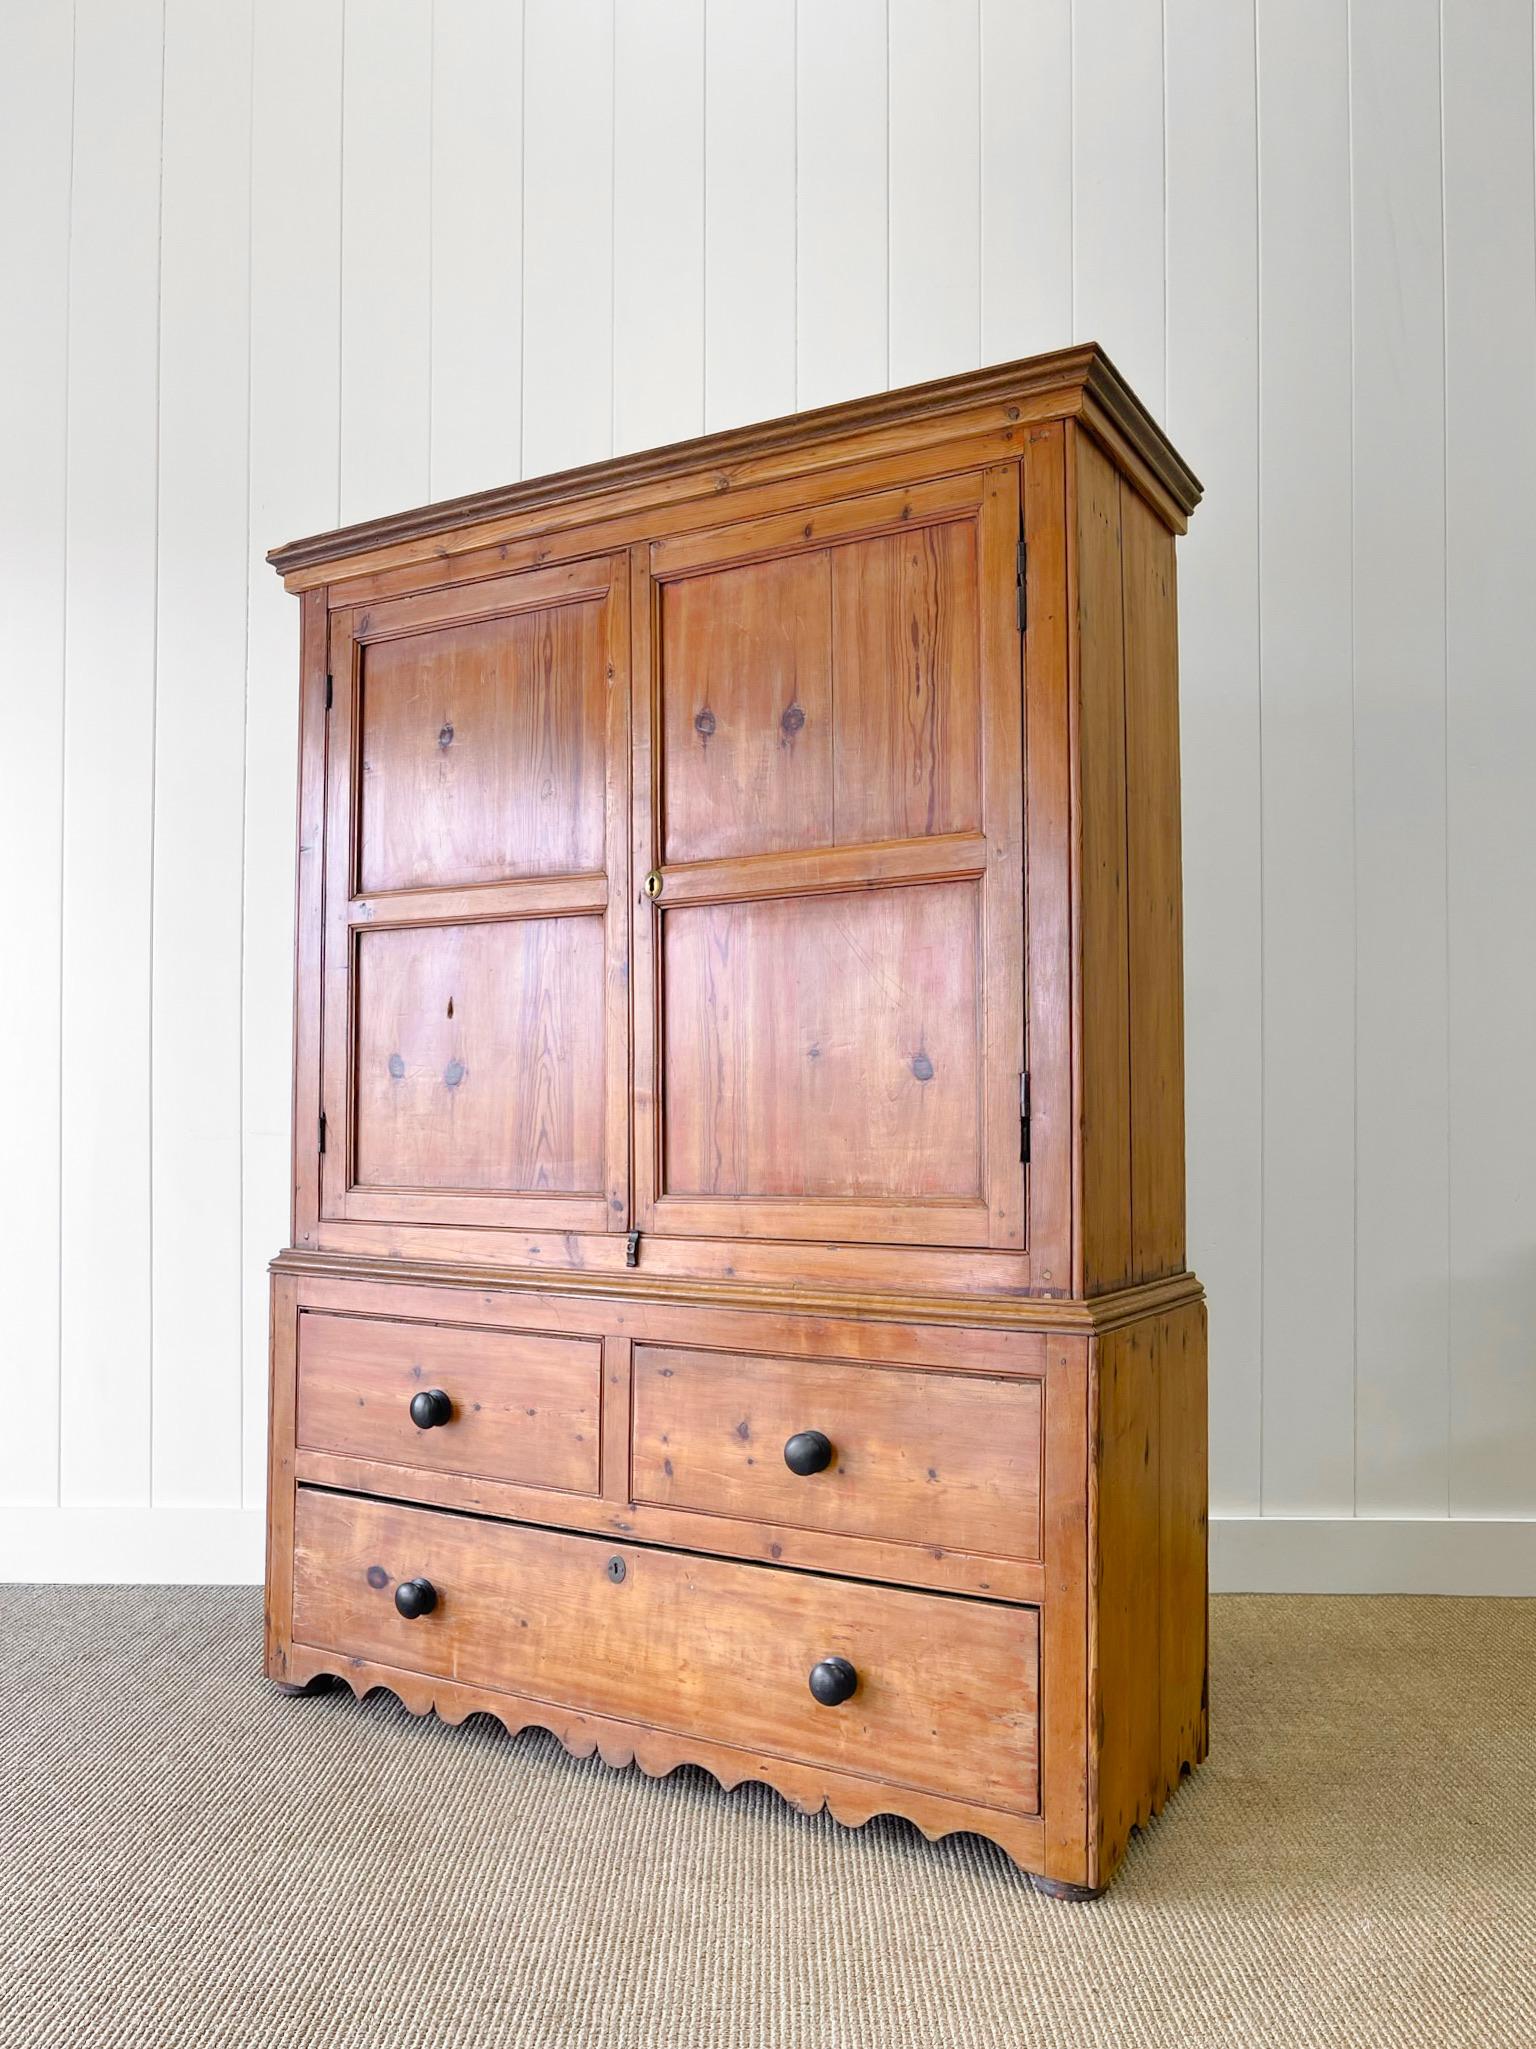 A charming English 19th century cupboard. Decorative paneled doors. The two drawers on the top of the base do NOT open. They are dummy drawers. The bottom single drawer opens as usual. All sits atop bracket feet with a subtly scrolled apron.